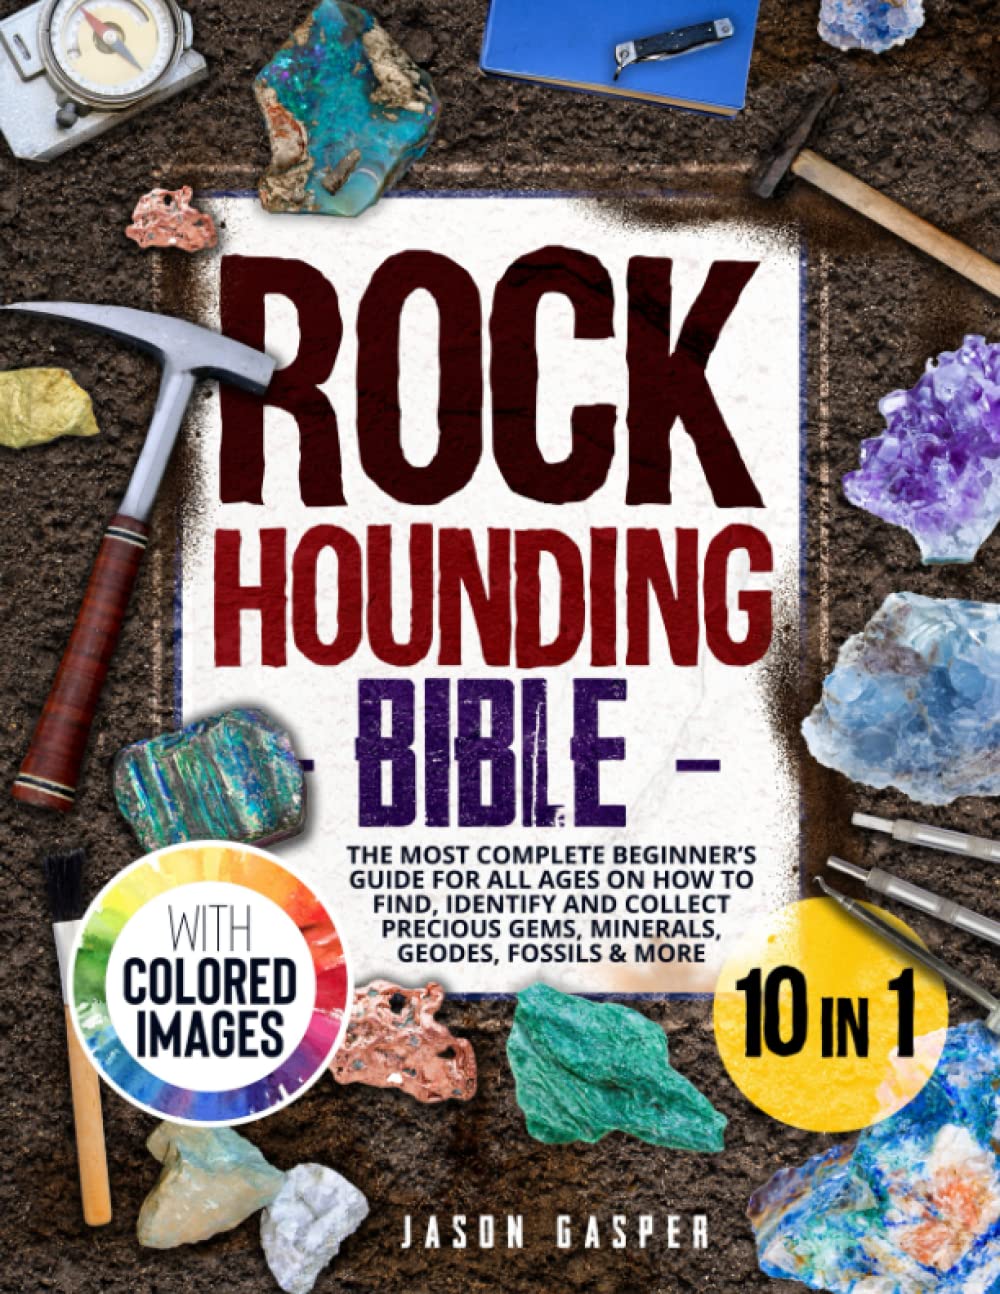 Rockhounding Bible: 10 In 1: The Most Complete Beginner’s Guide For All Ages On How To Find, Identify And Collect Precious Gems, Minerals, Geodes, Fossils & More. FULL-COLOR EDITION